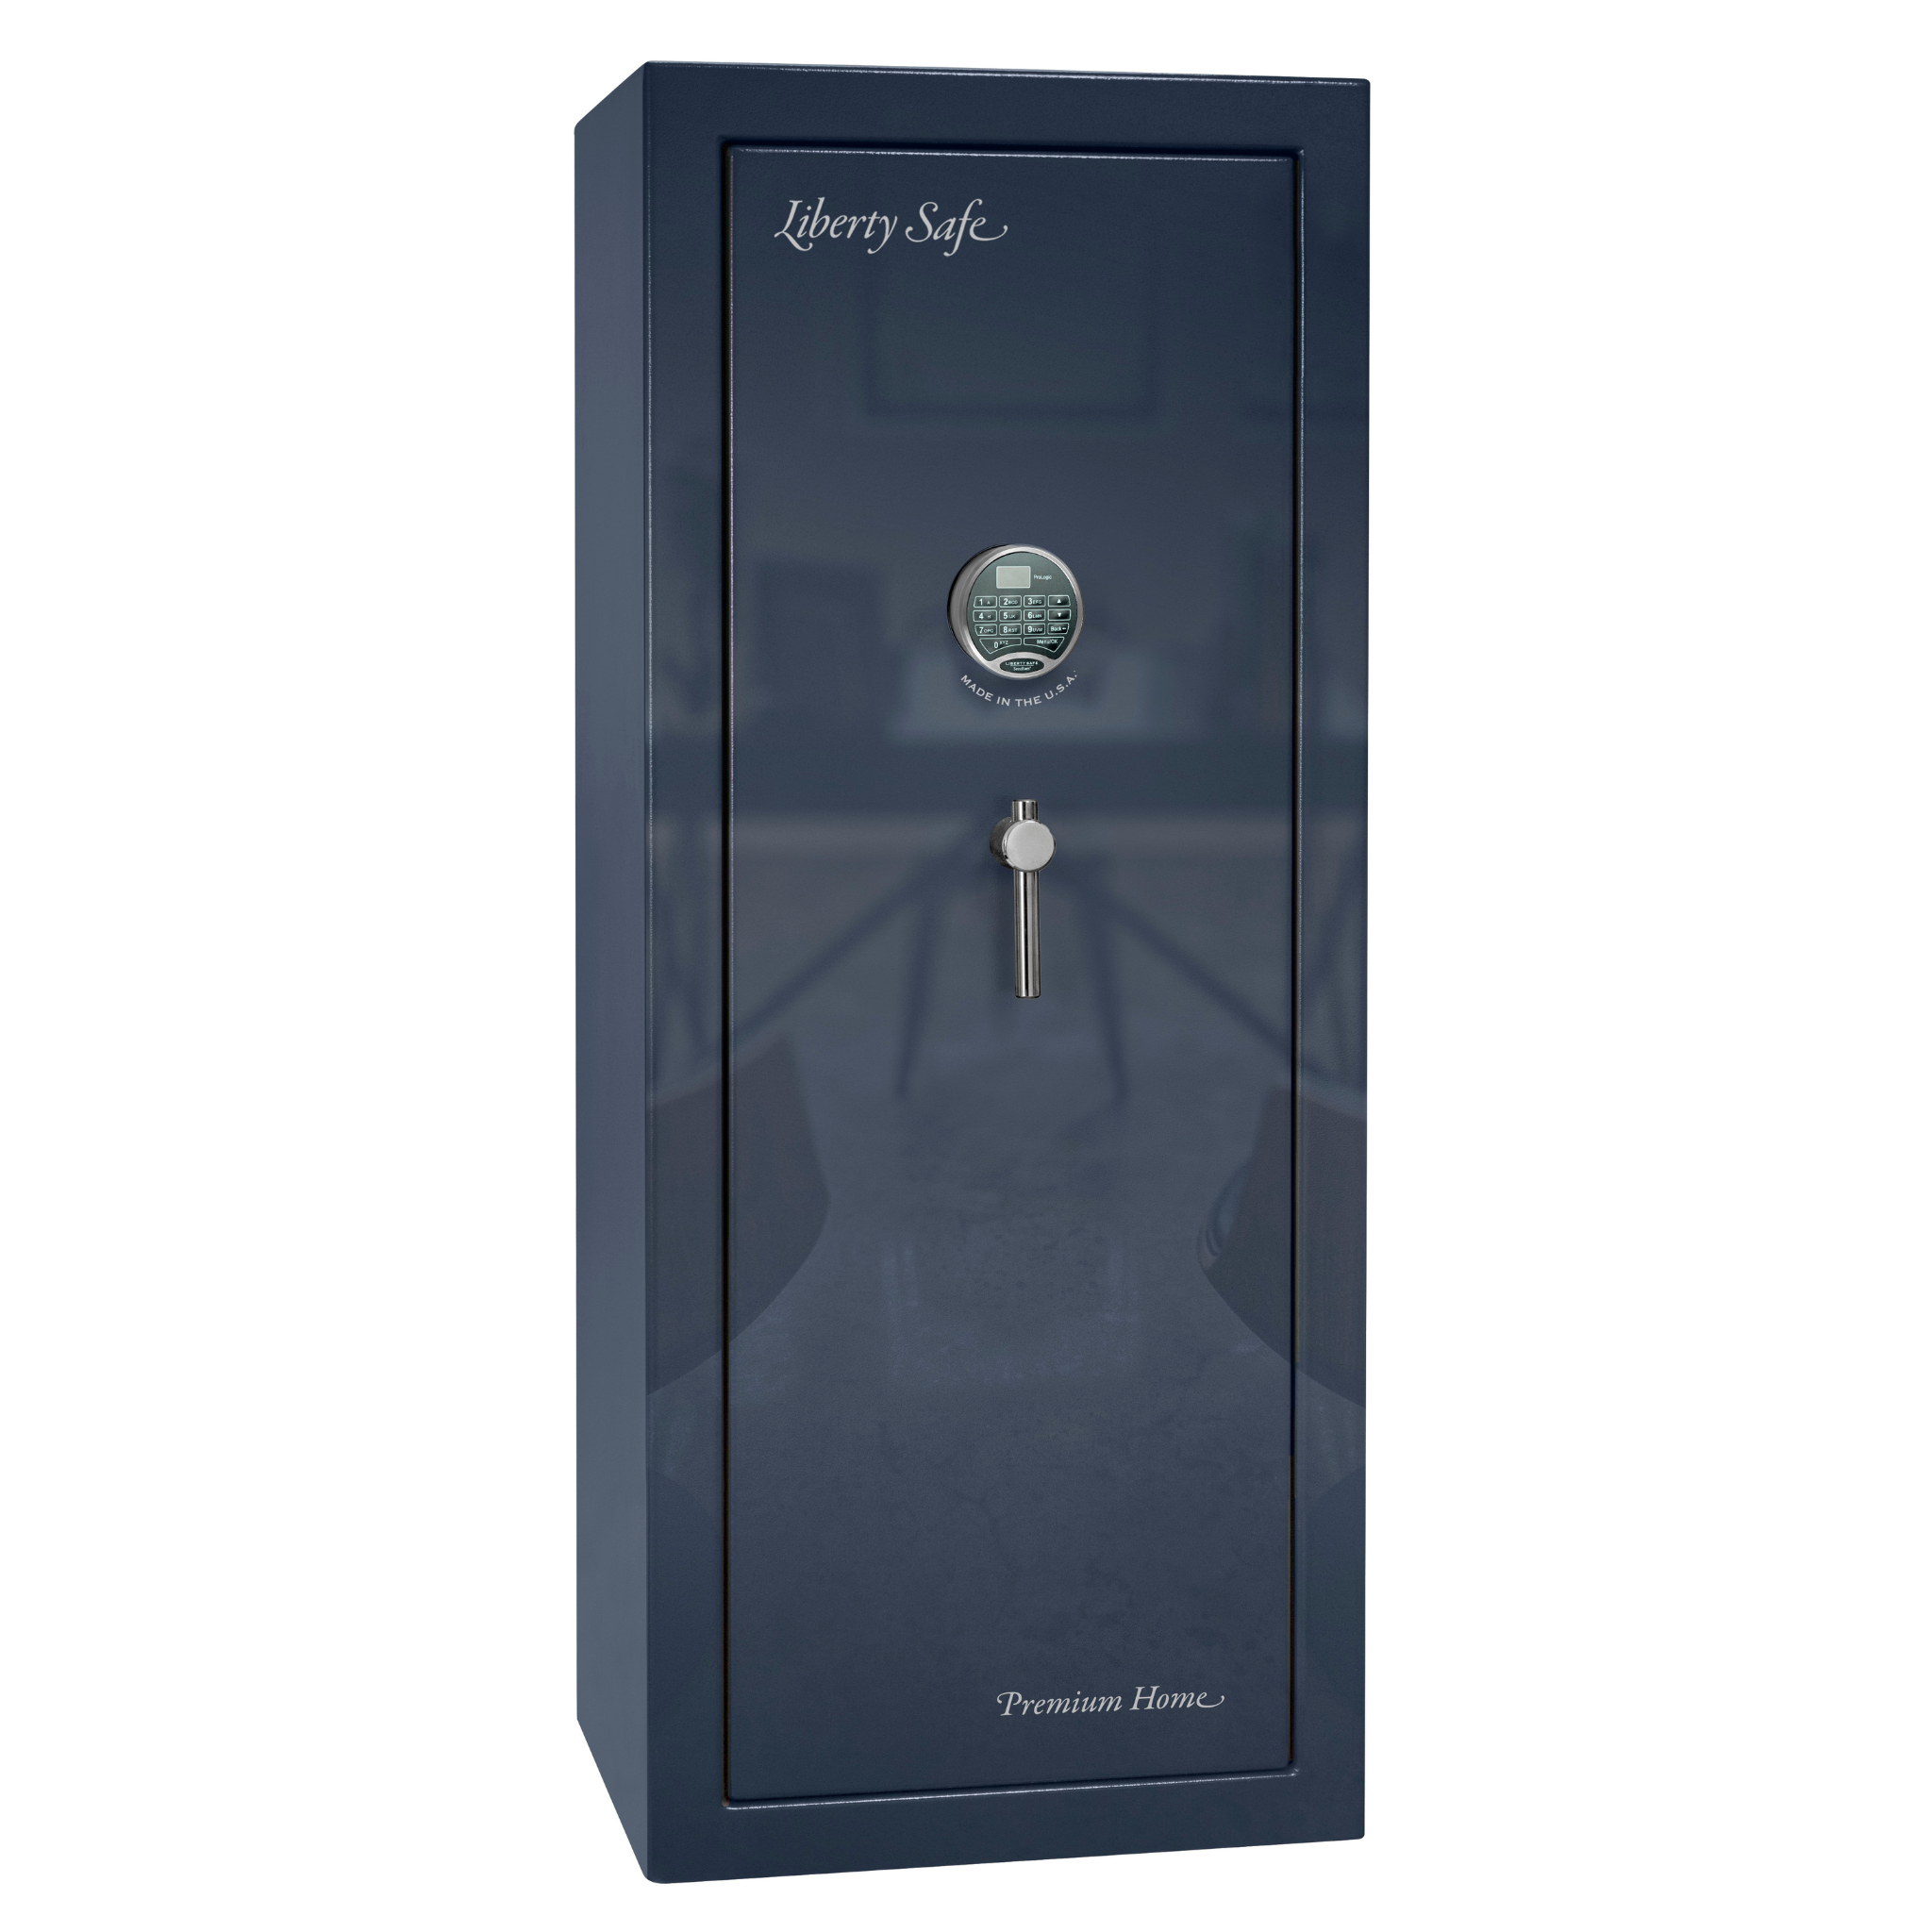 Premium Home Series | Level 7 Security | 2 Hour Fire Protection | 17 | Dimensions: 60.25"(H) x 24.5"(W) x 19"(D) | Blue Gloss - Closed Door